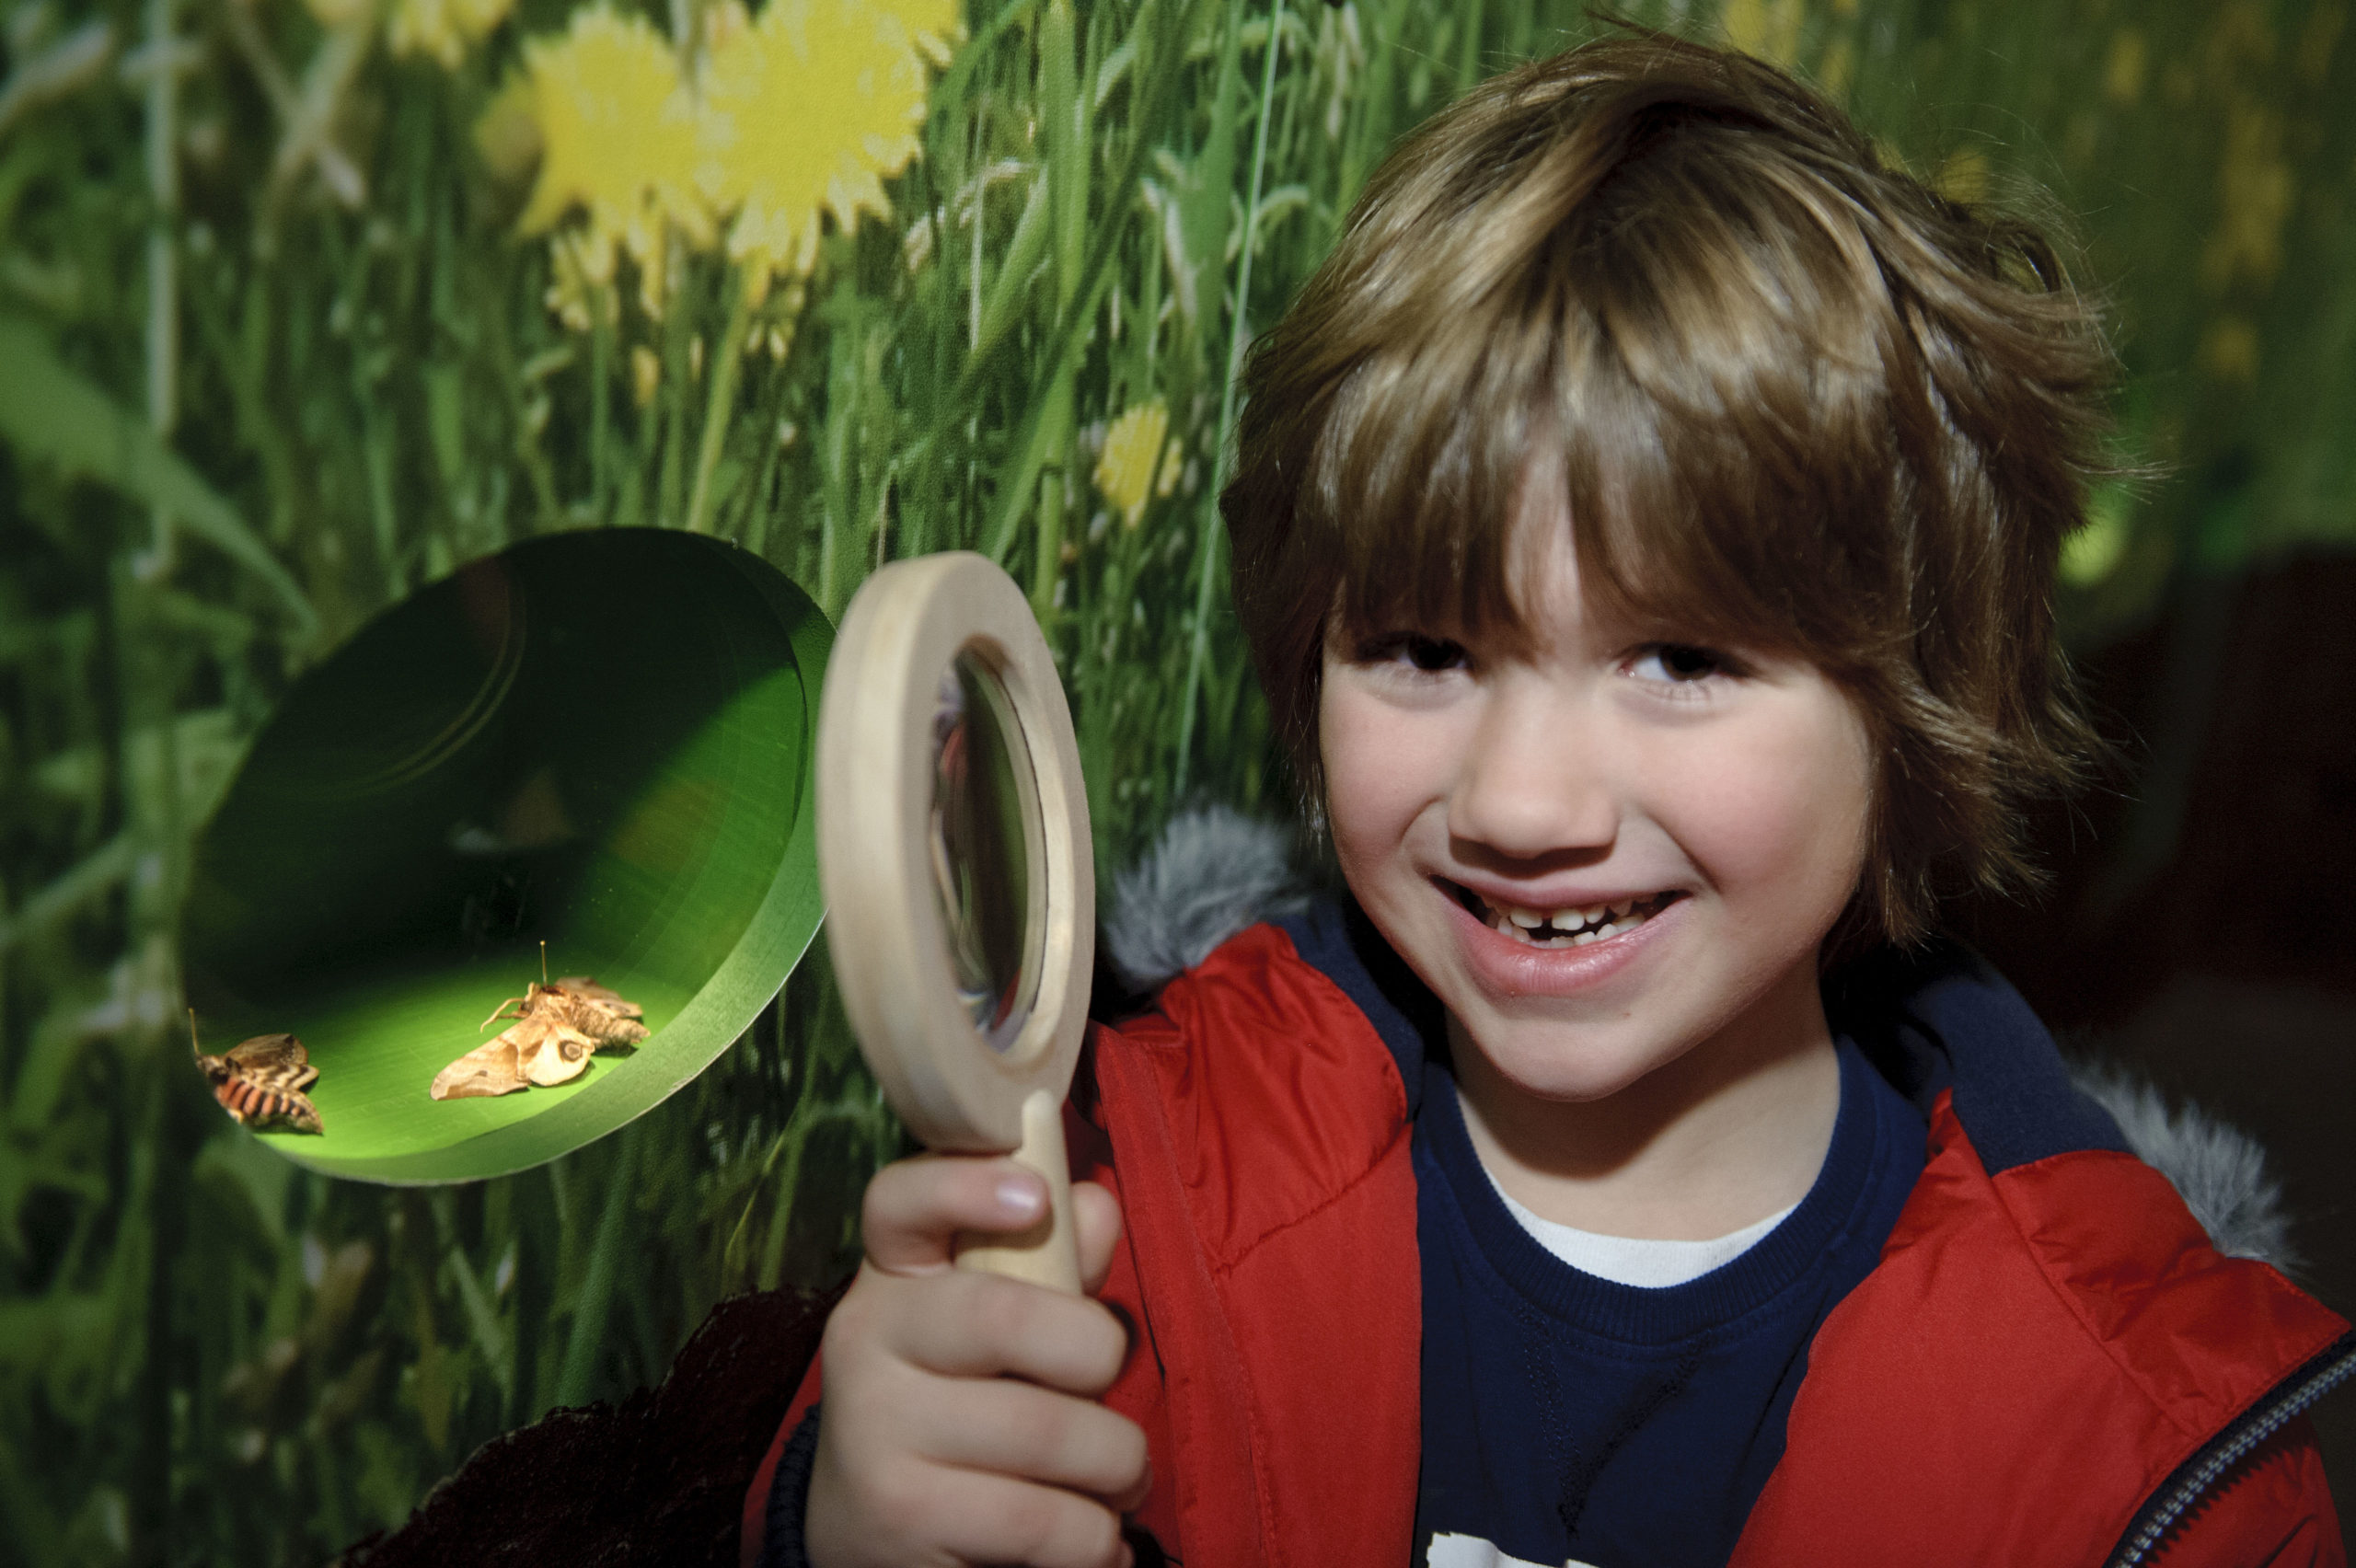 An enthusiastic young child stands in a museum holding a magnifying glass.